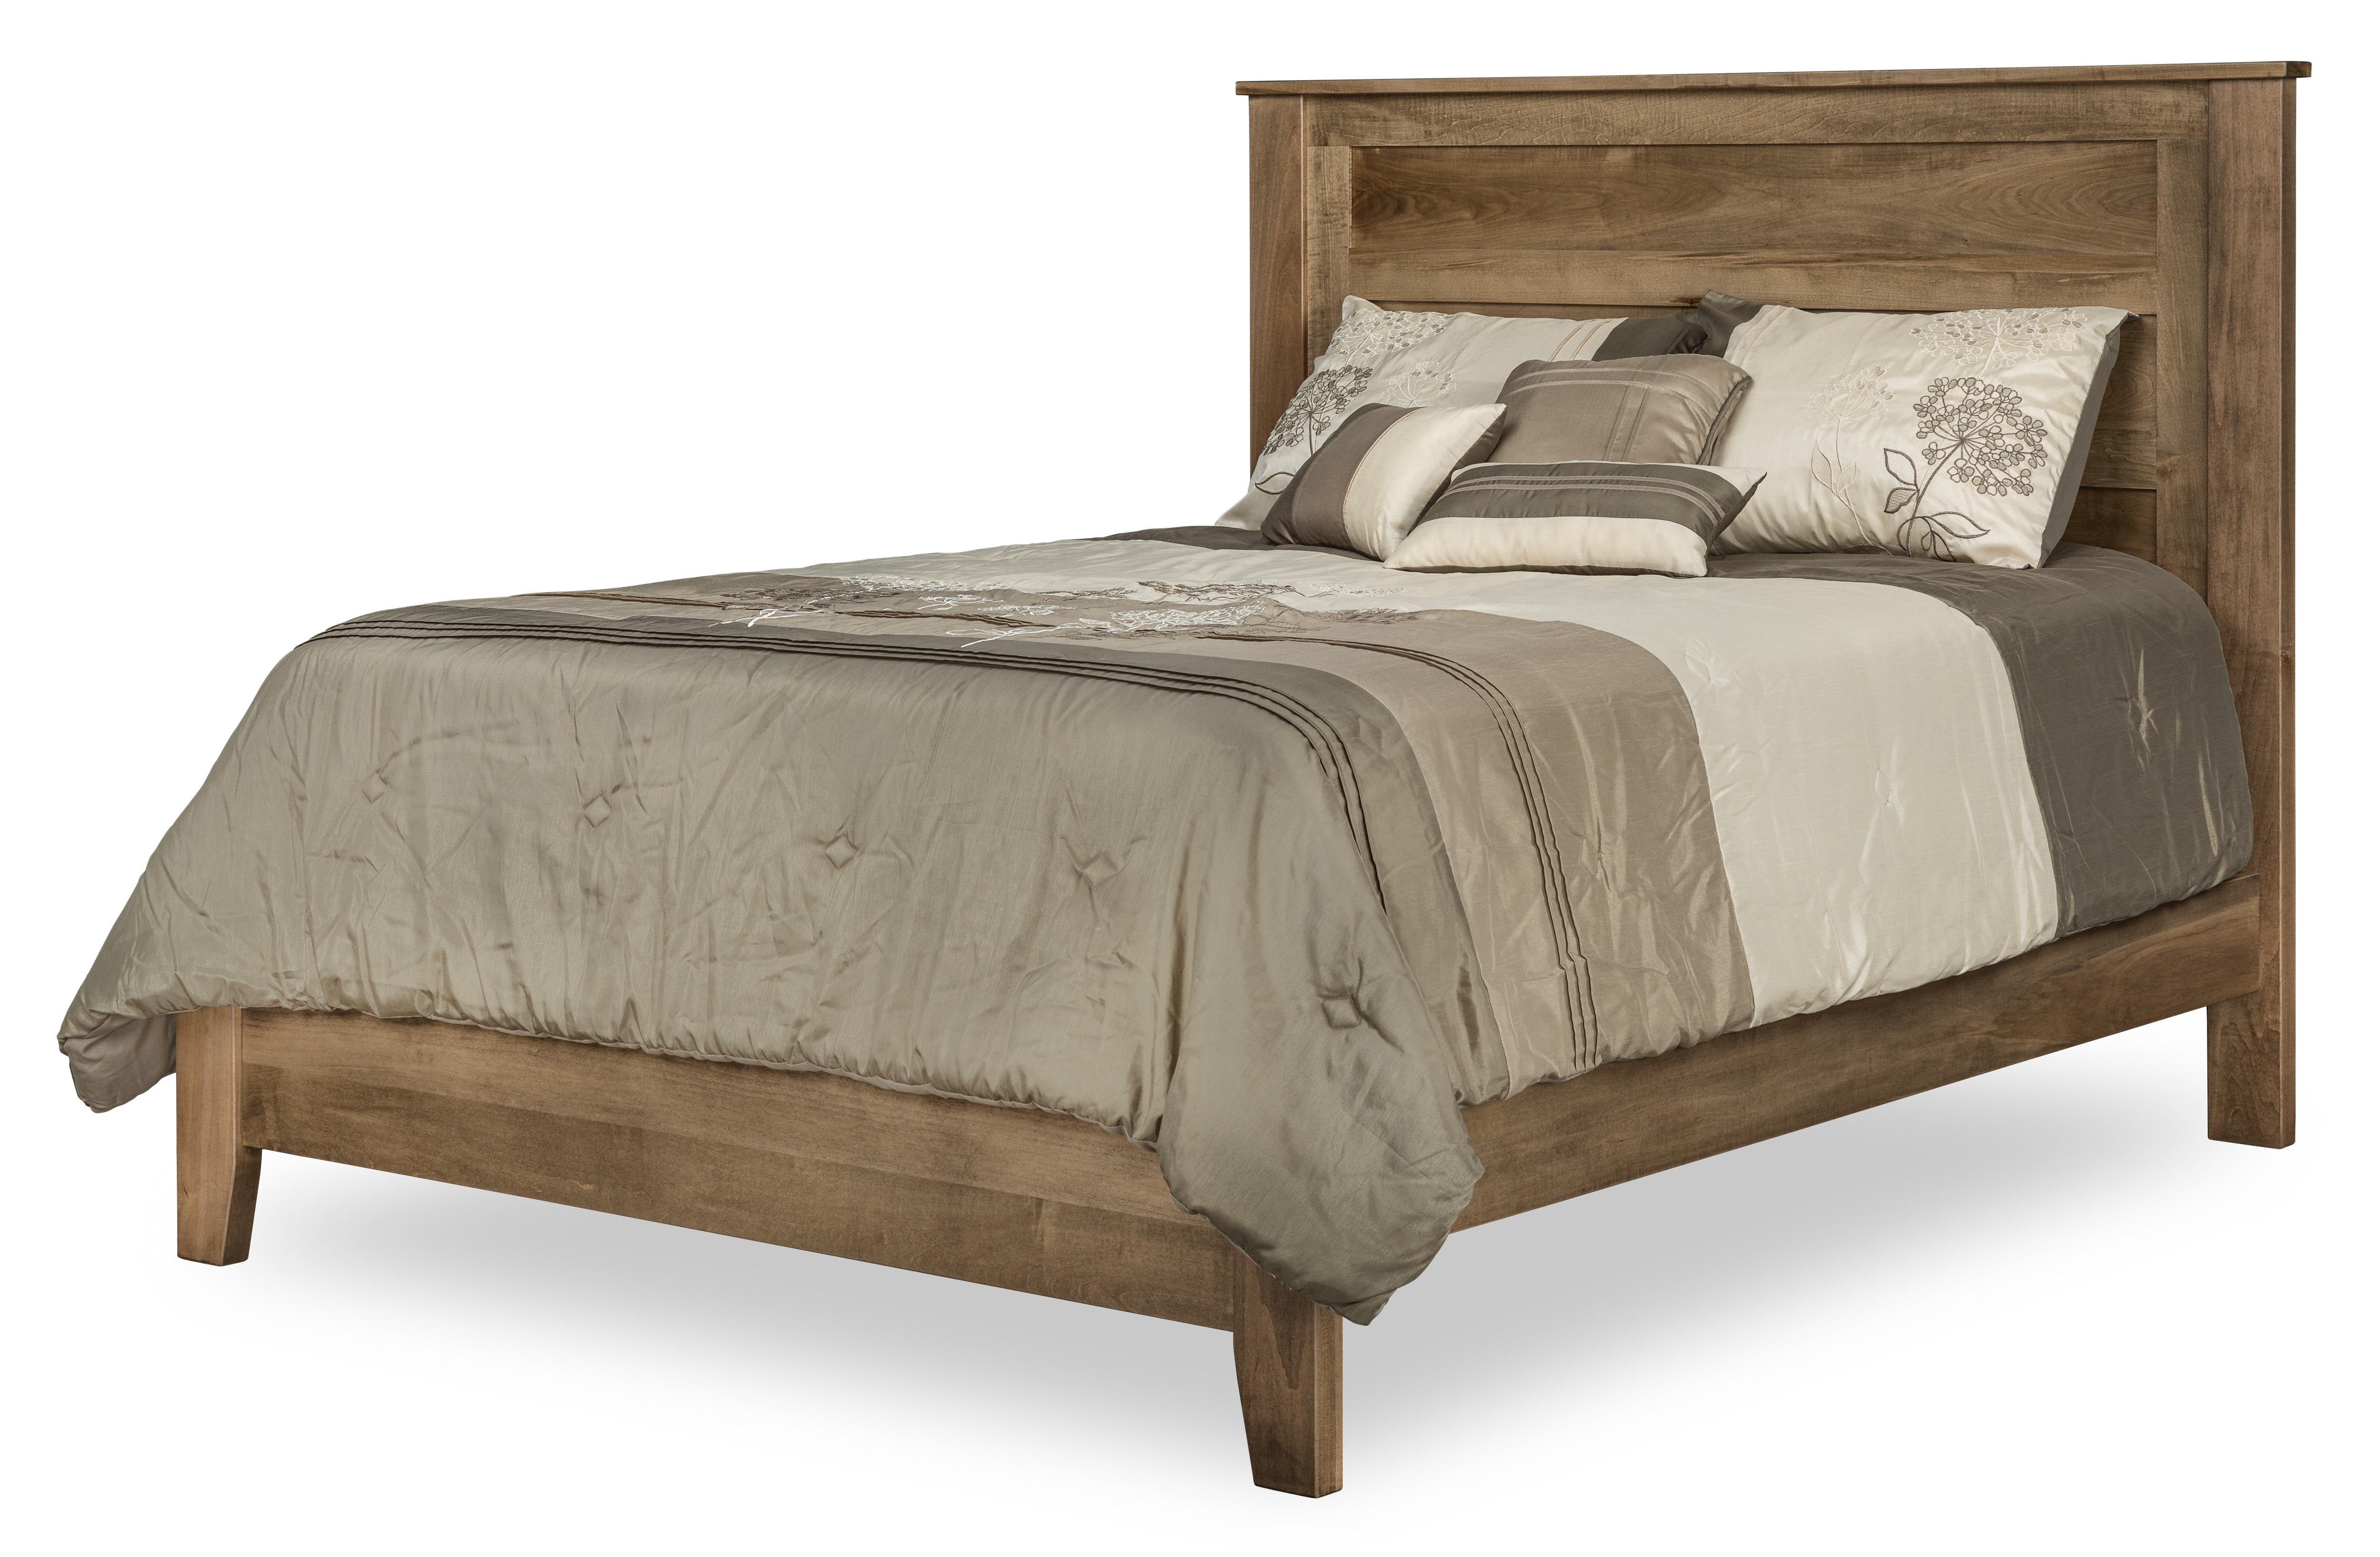 mckenzie bed in brown maple with sandstone stain